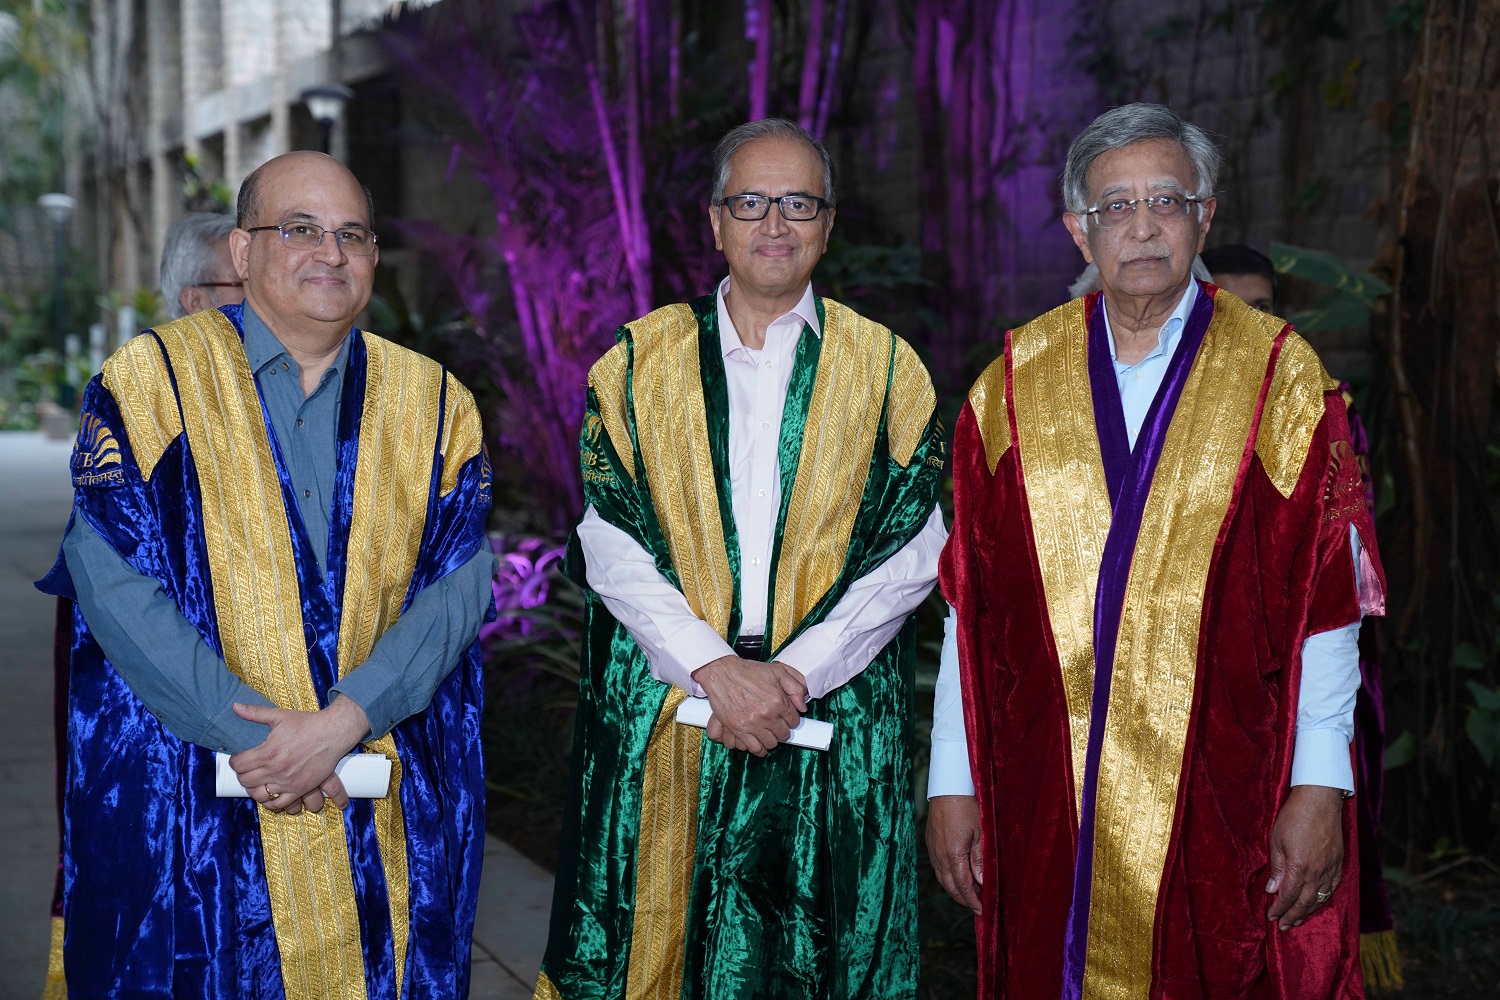 (L-R) Prof. Rishikesha T Krishnan, Director, IIMB, Dr. Devi Prasad Shetty, Chairperson, Board of Governors, IIMB, and Chief Guest Baba Kalyani, MD, Bharath Forge, and Founding Chairman of Pratham Pune Education Foundation, at the 48th convocation at IIM Bangalore on March 31st, 2023.